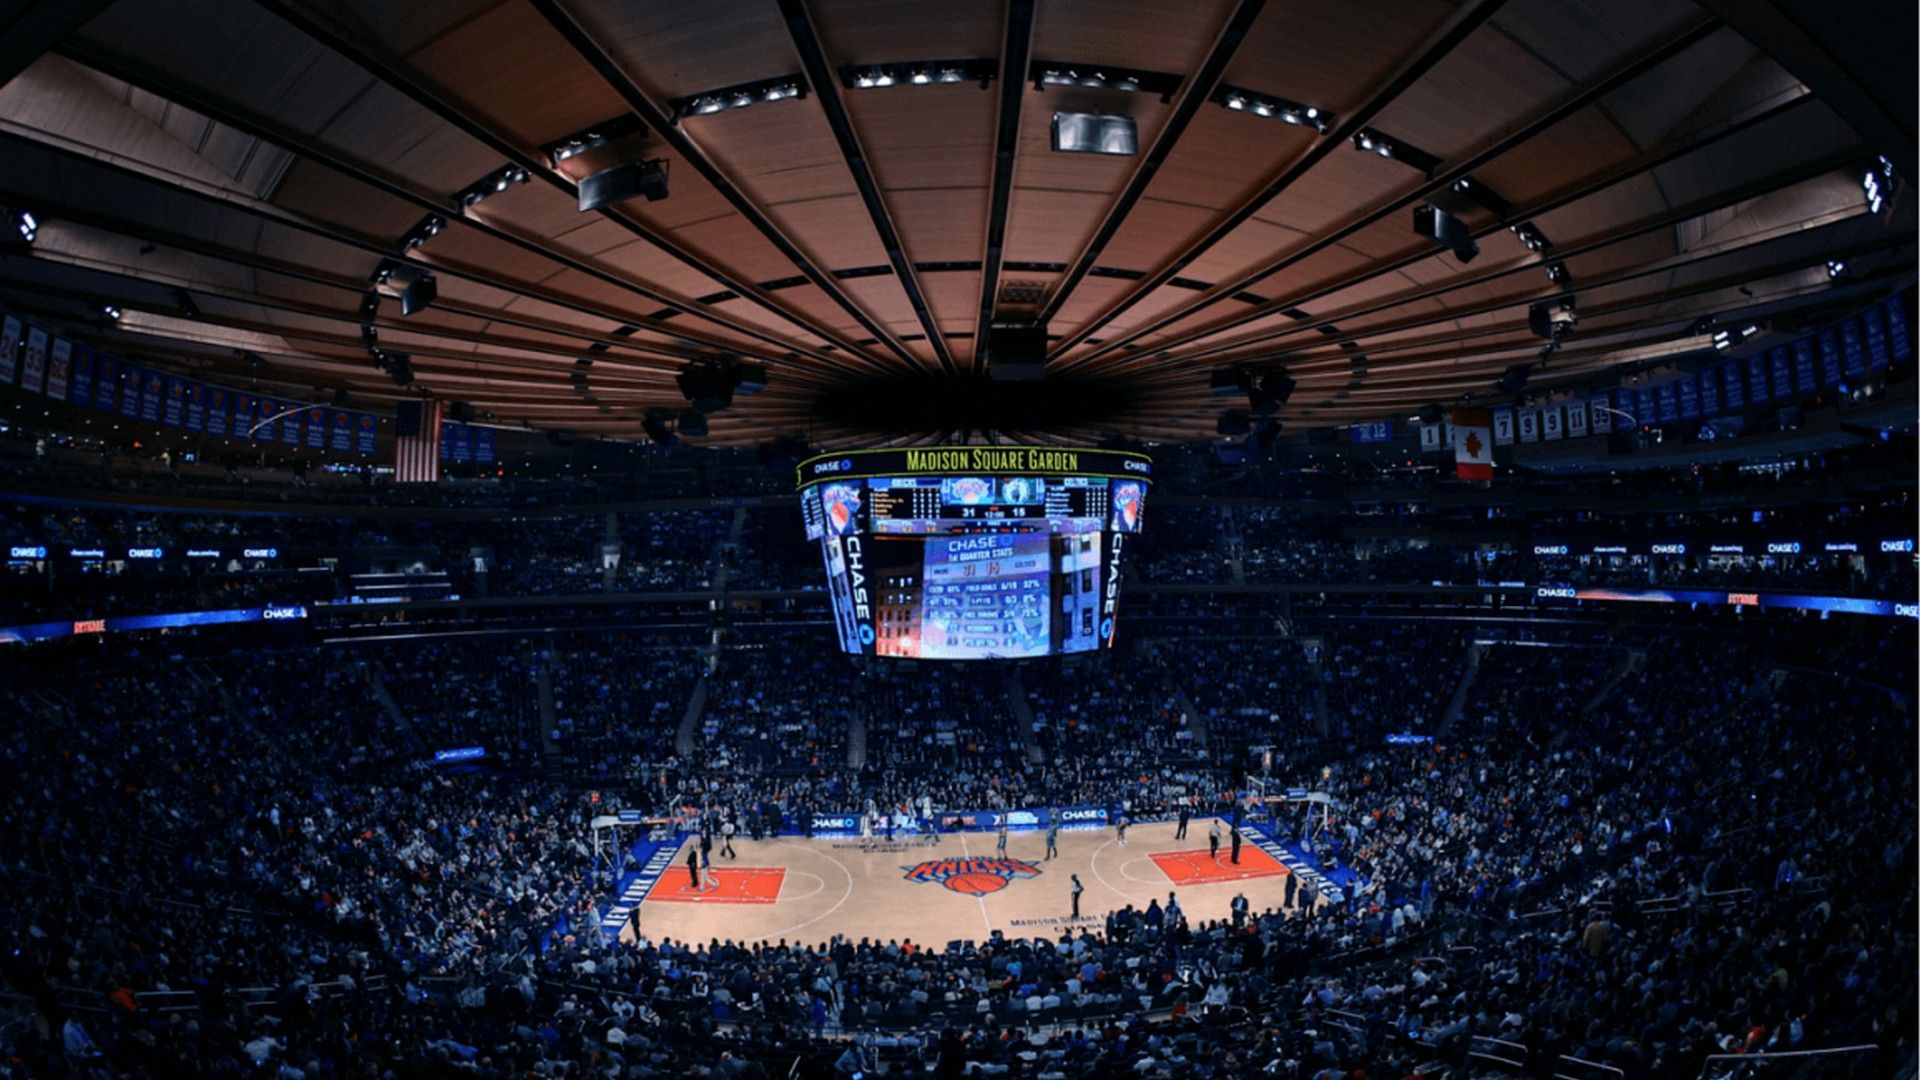 Wallpaper HD Knicks With Image Dimensions Pixel Square